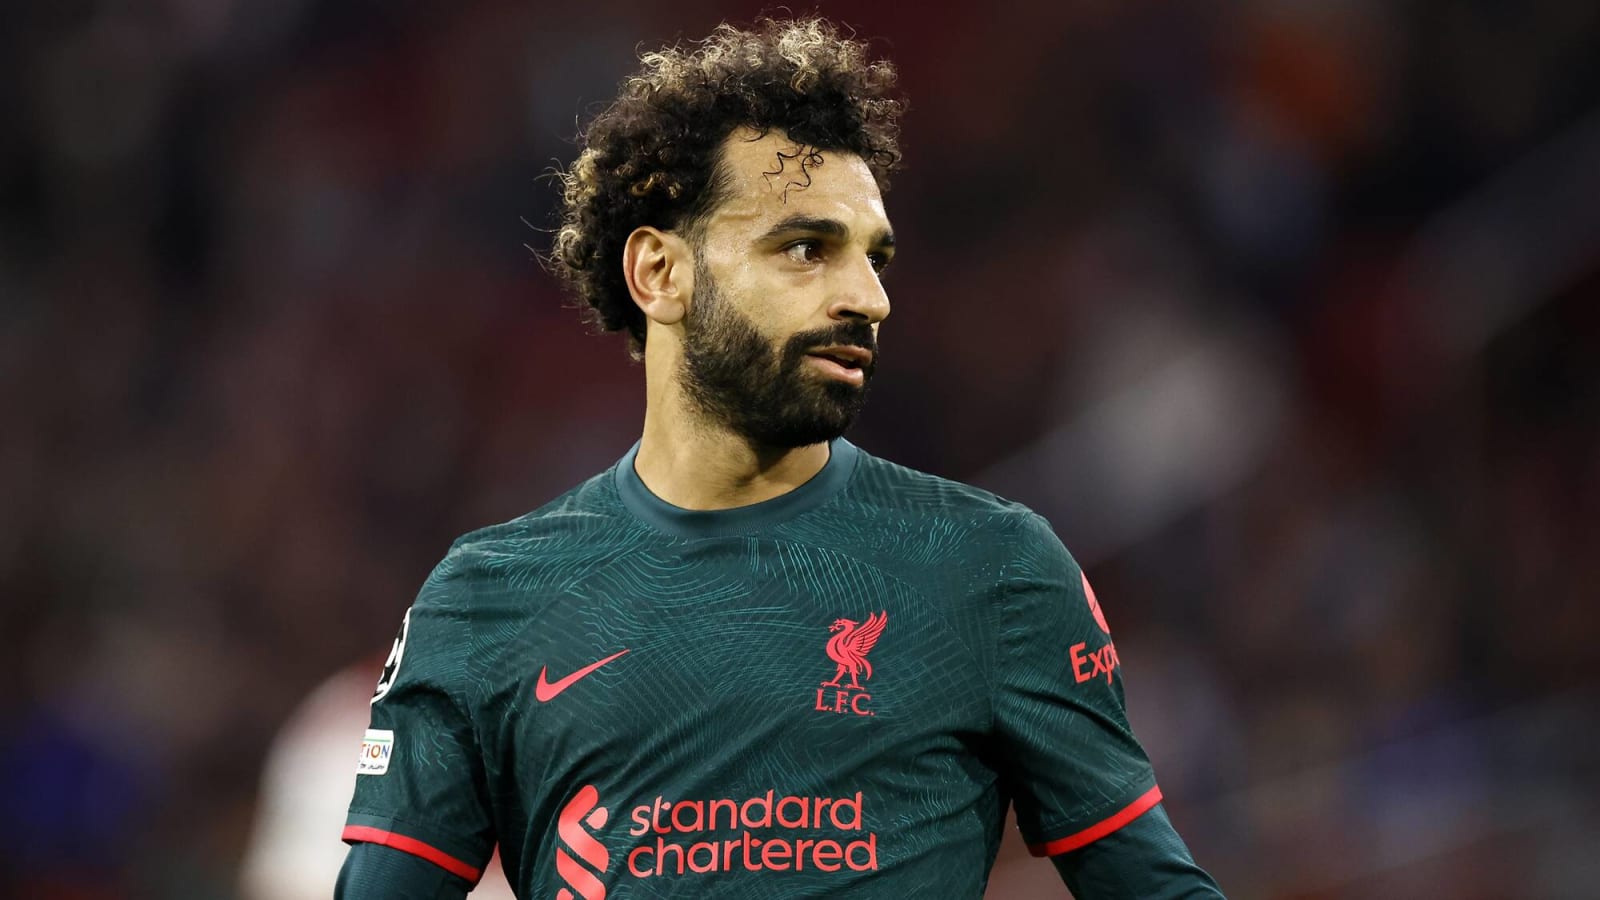 African legend accuses Mo Salah of ‘plotting’ return to Liverpool after AFCON injury